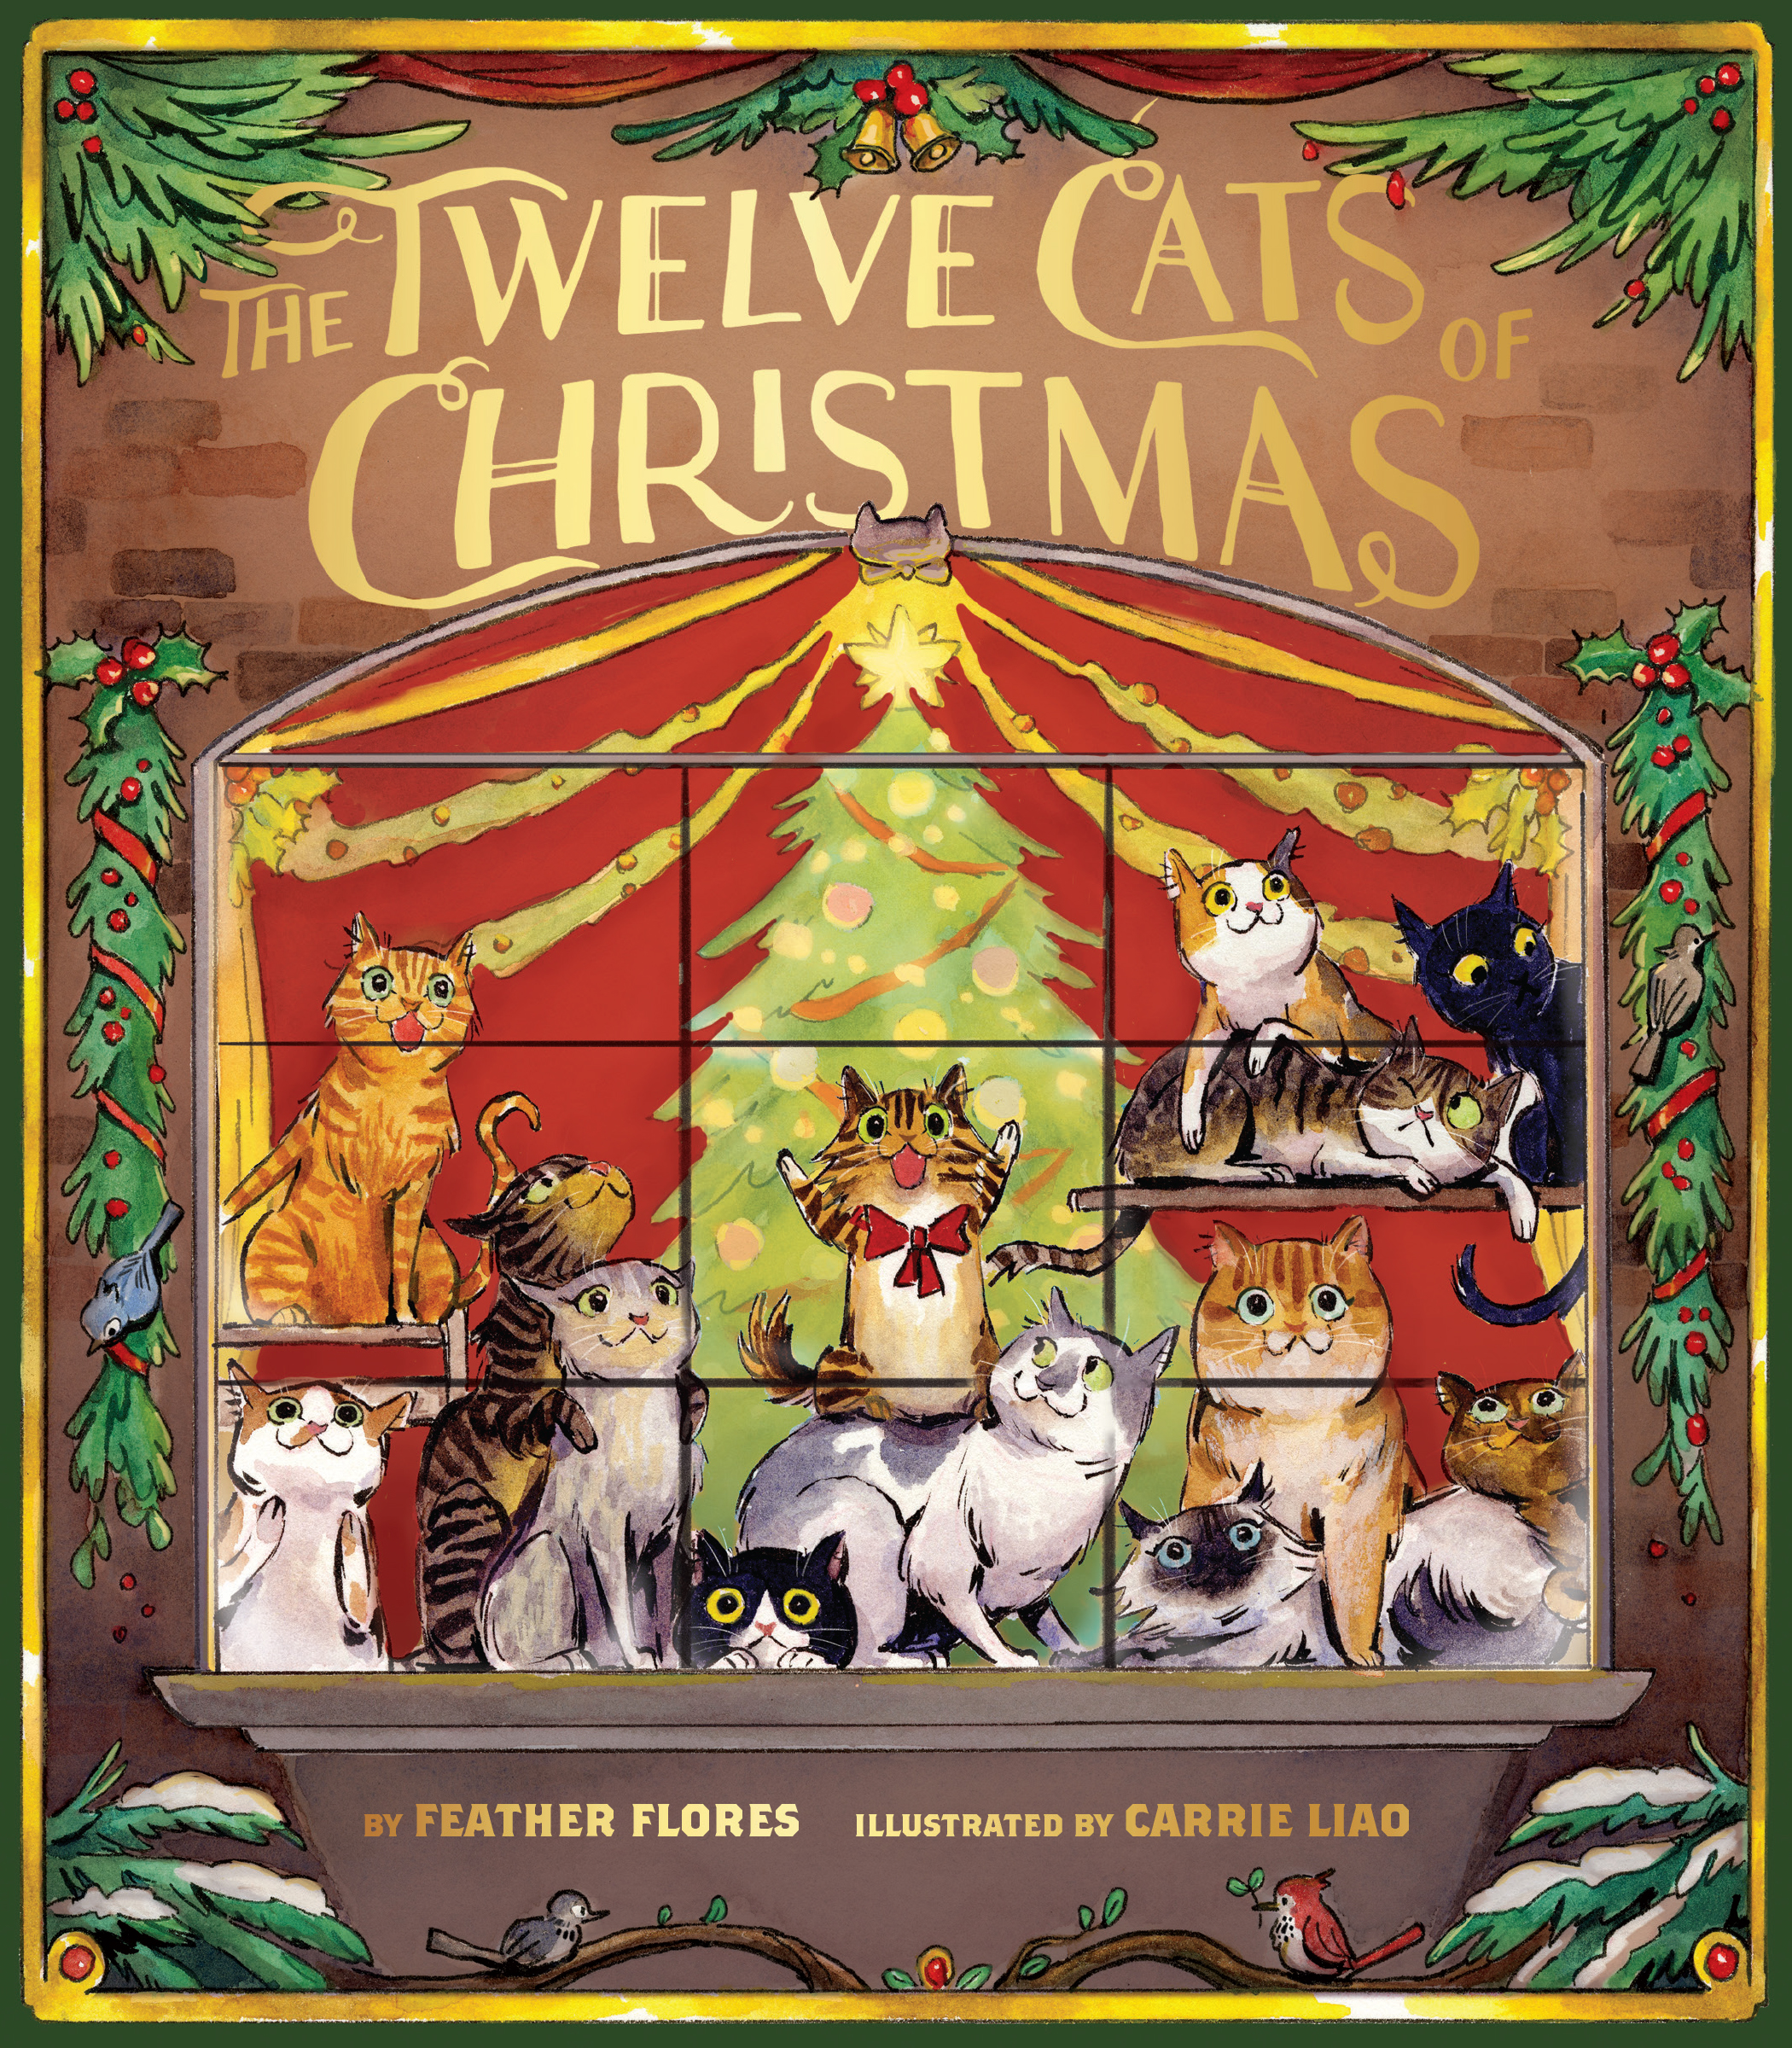 A picture book cover depicting twelve cats and one kitten of various sizes and breeds, posed inside the window of a festively-decorated brick house. A brightly-lit Christmas tree shines in the background.